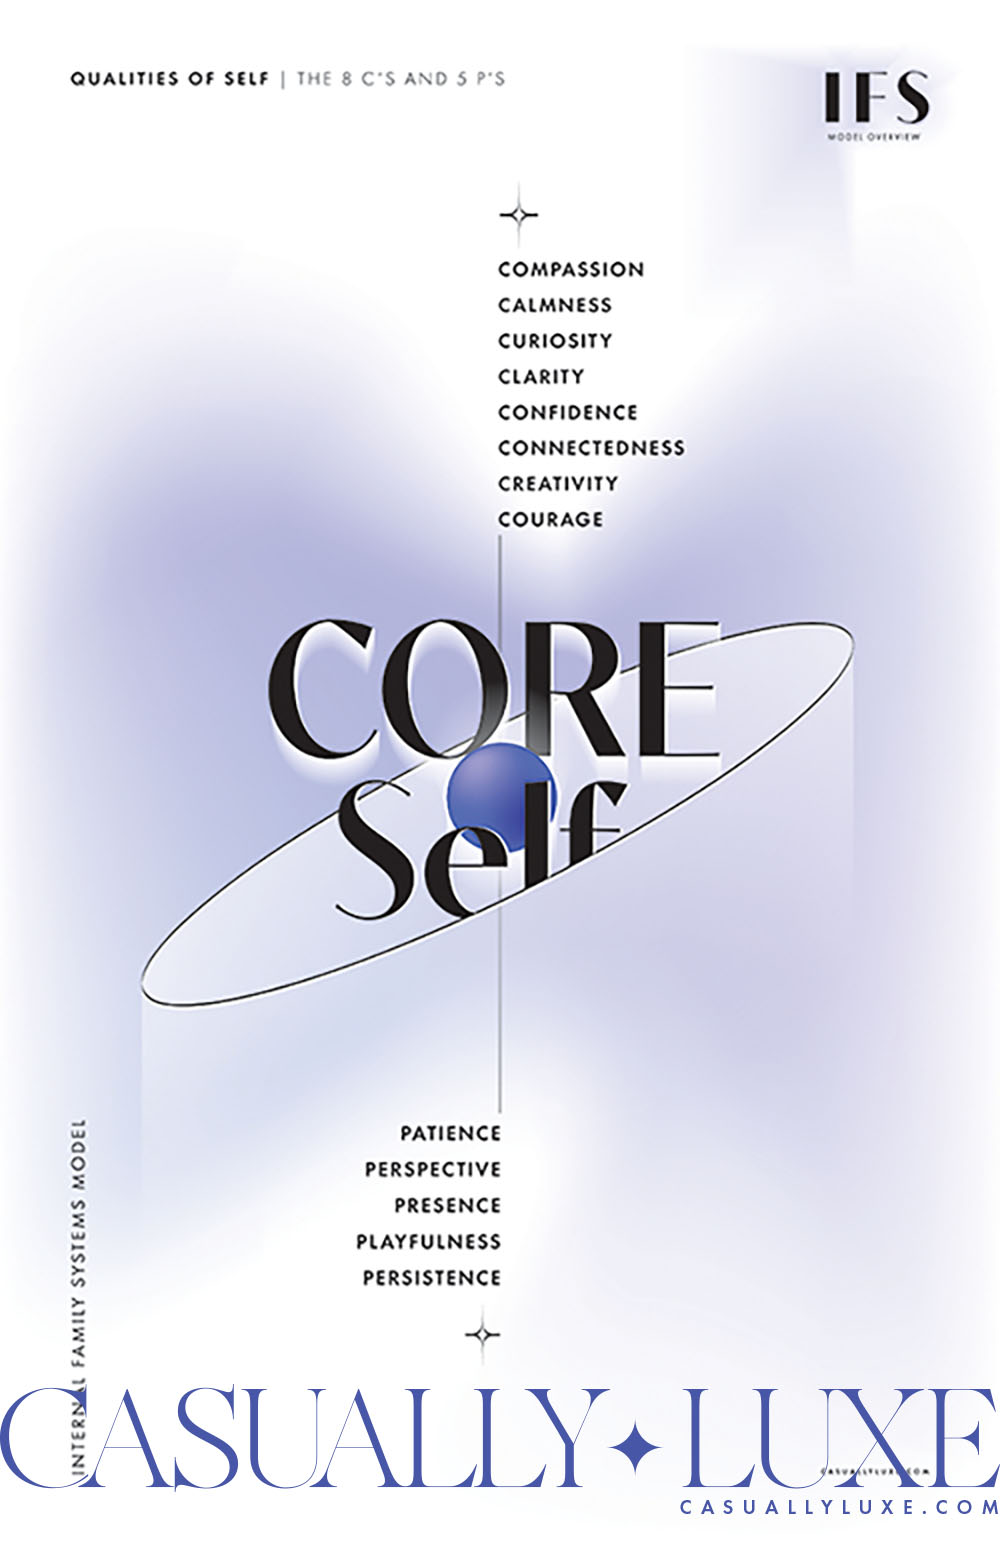 IFS therapy 8 Cs and 5 Ps of the Core Self